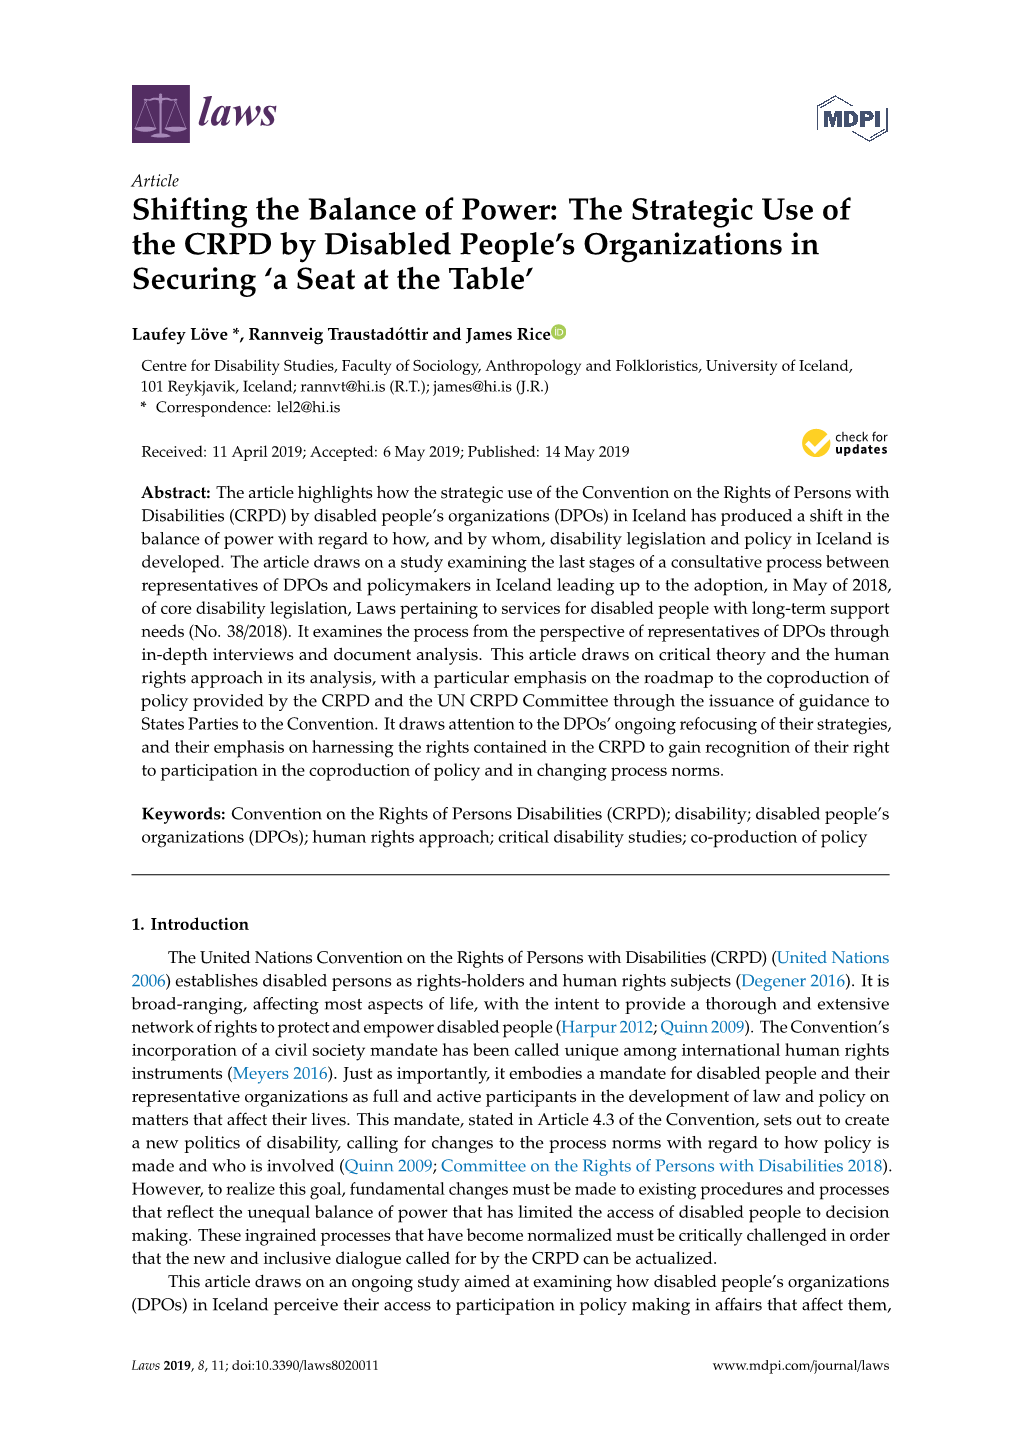 The Strategic Use of the CRPD by Disabled People's